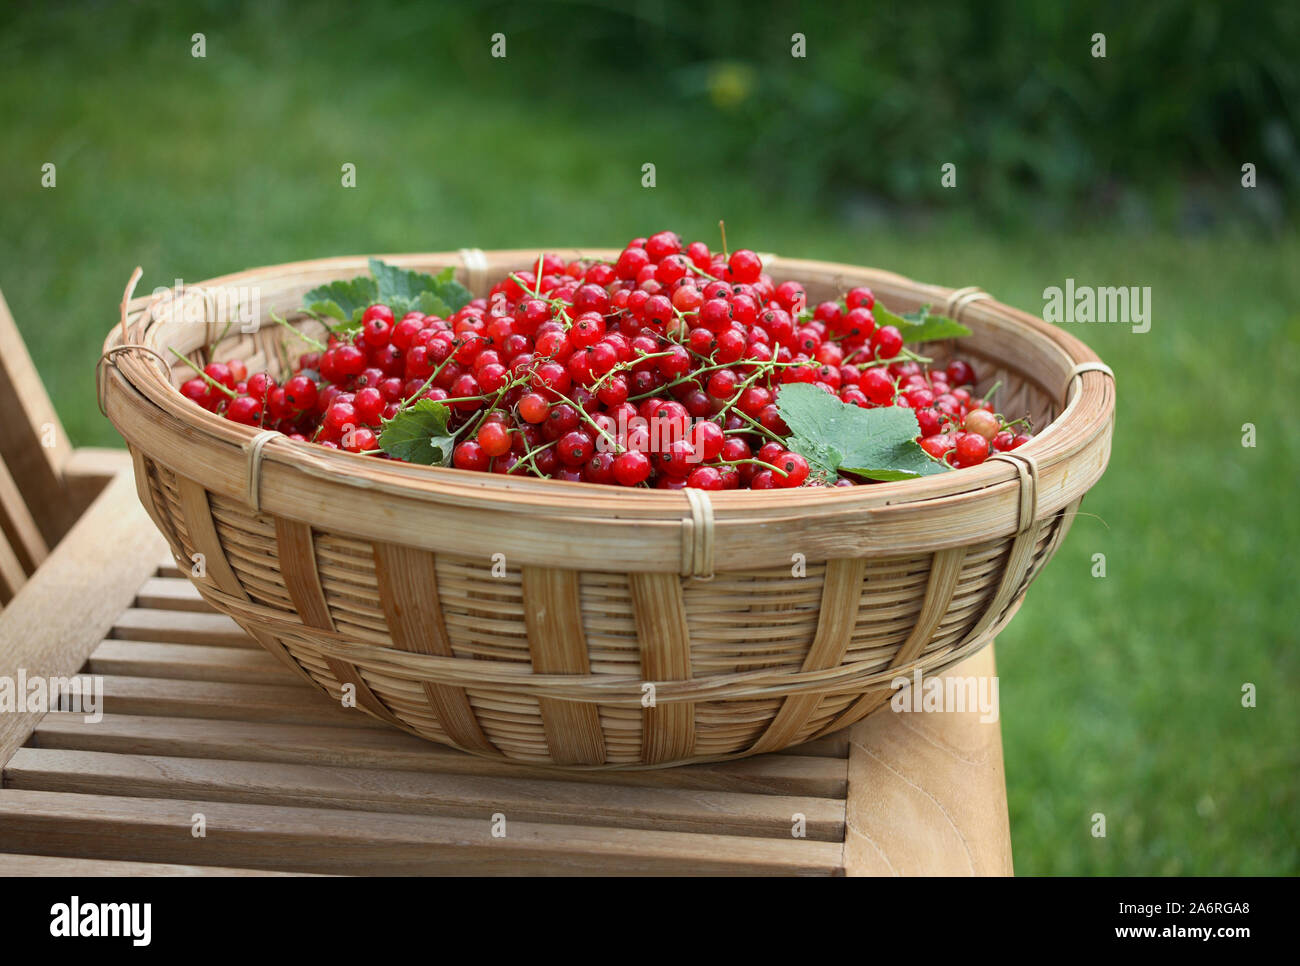 RED CURRANT freshly picked in a wooden bowl Stock Photo